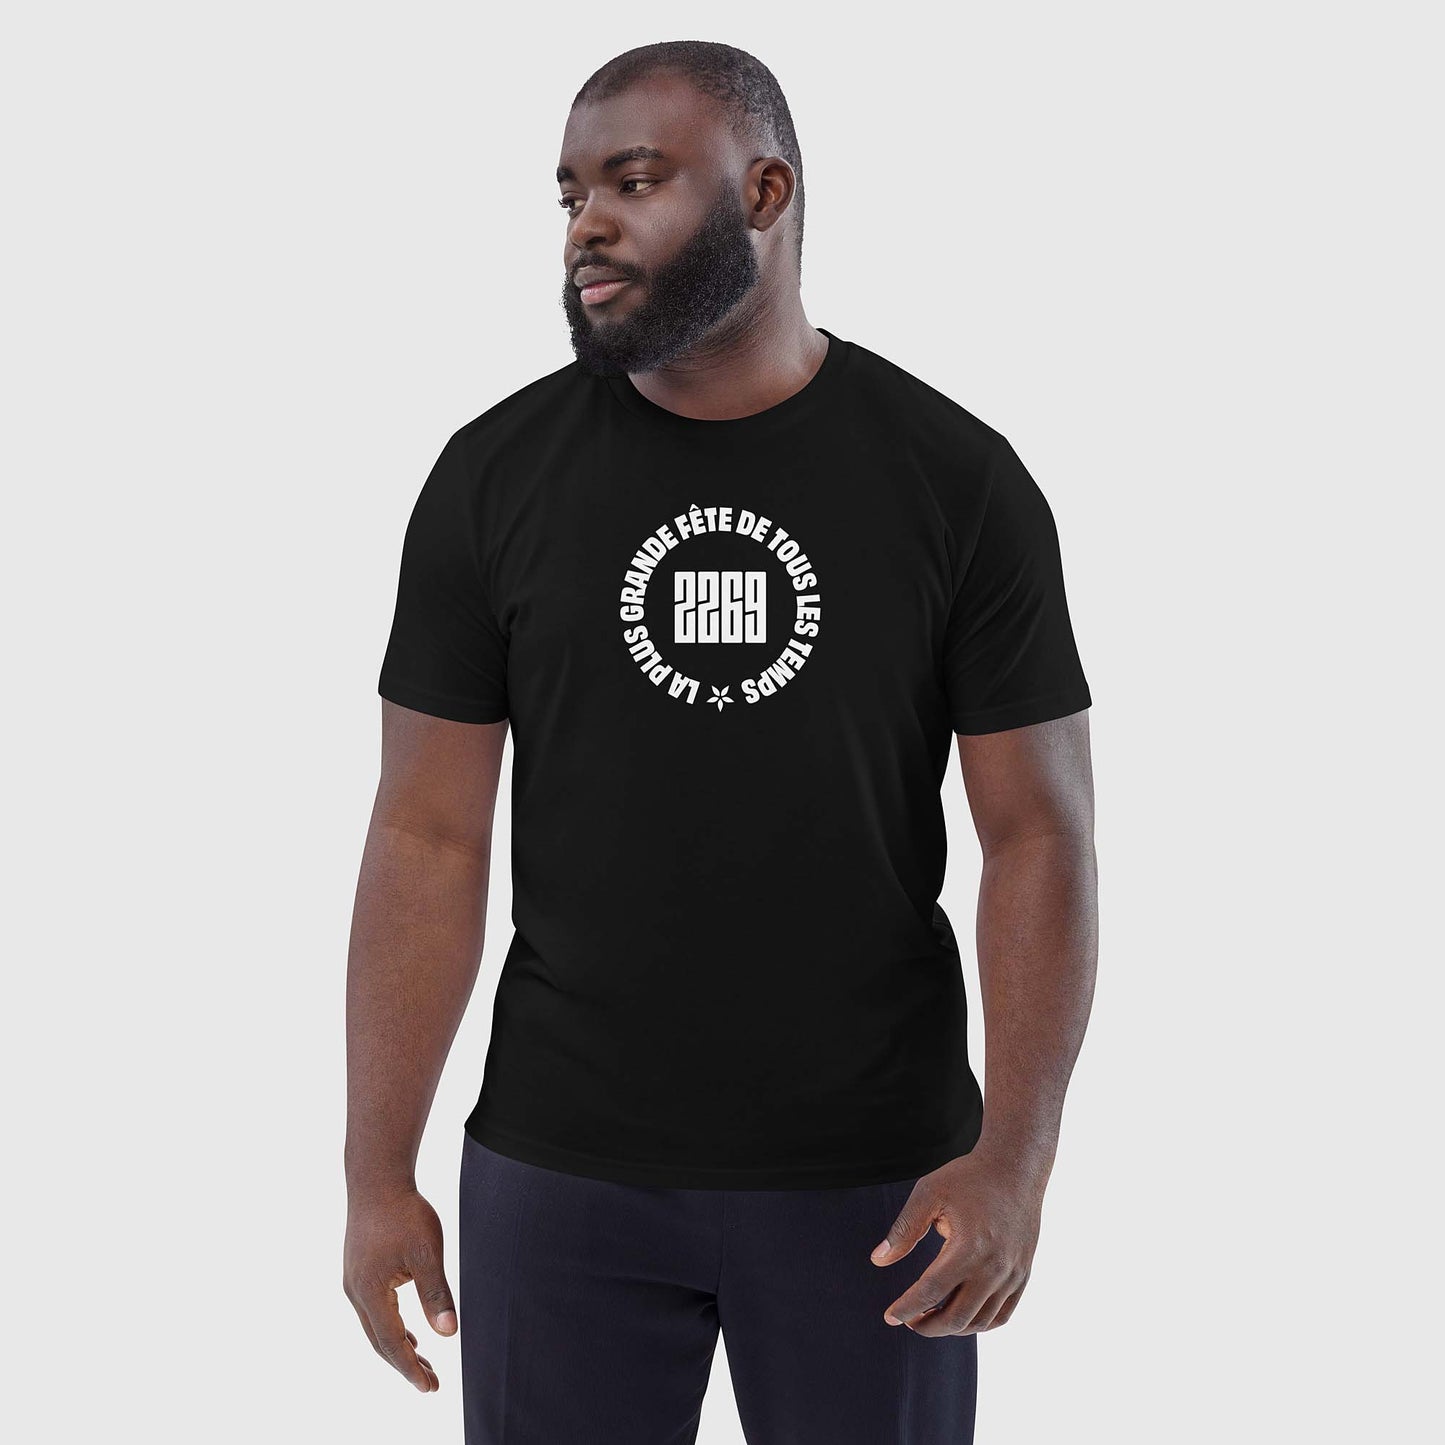 Men's black organic cotton t-shirt with French 2269 party circle